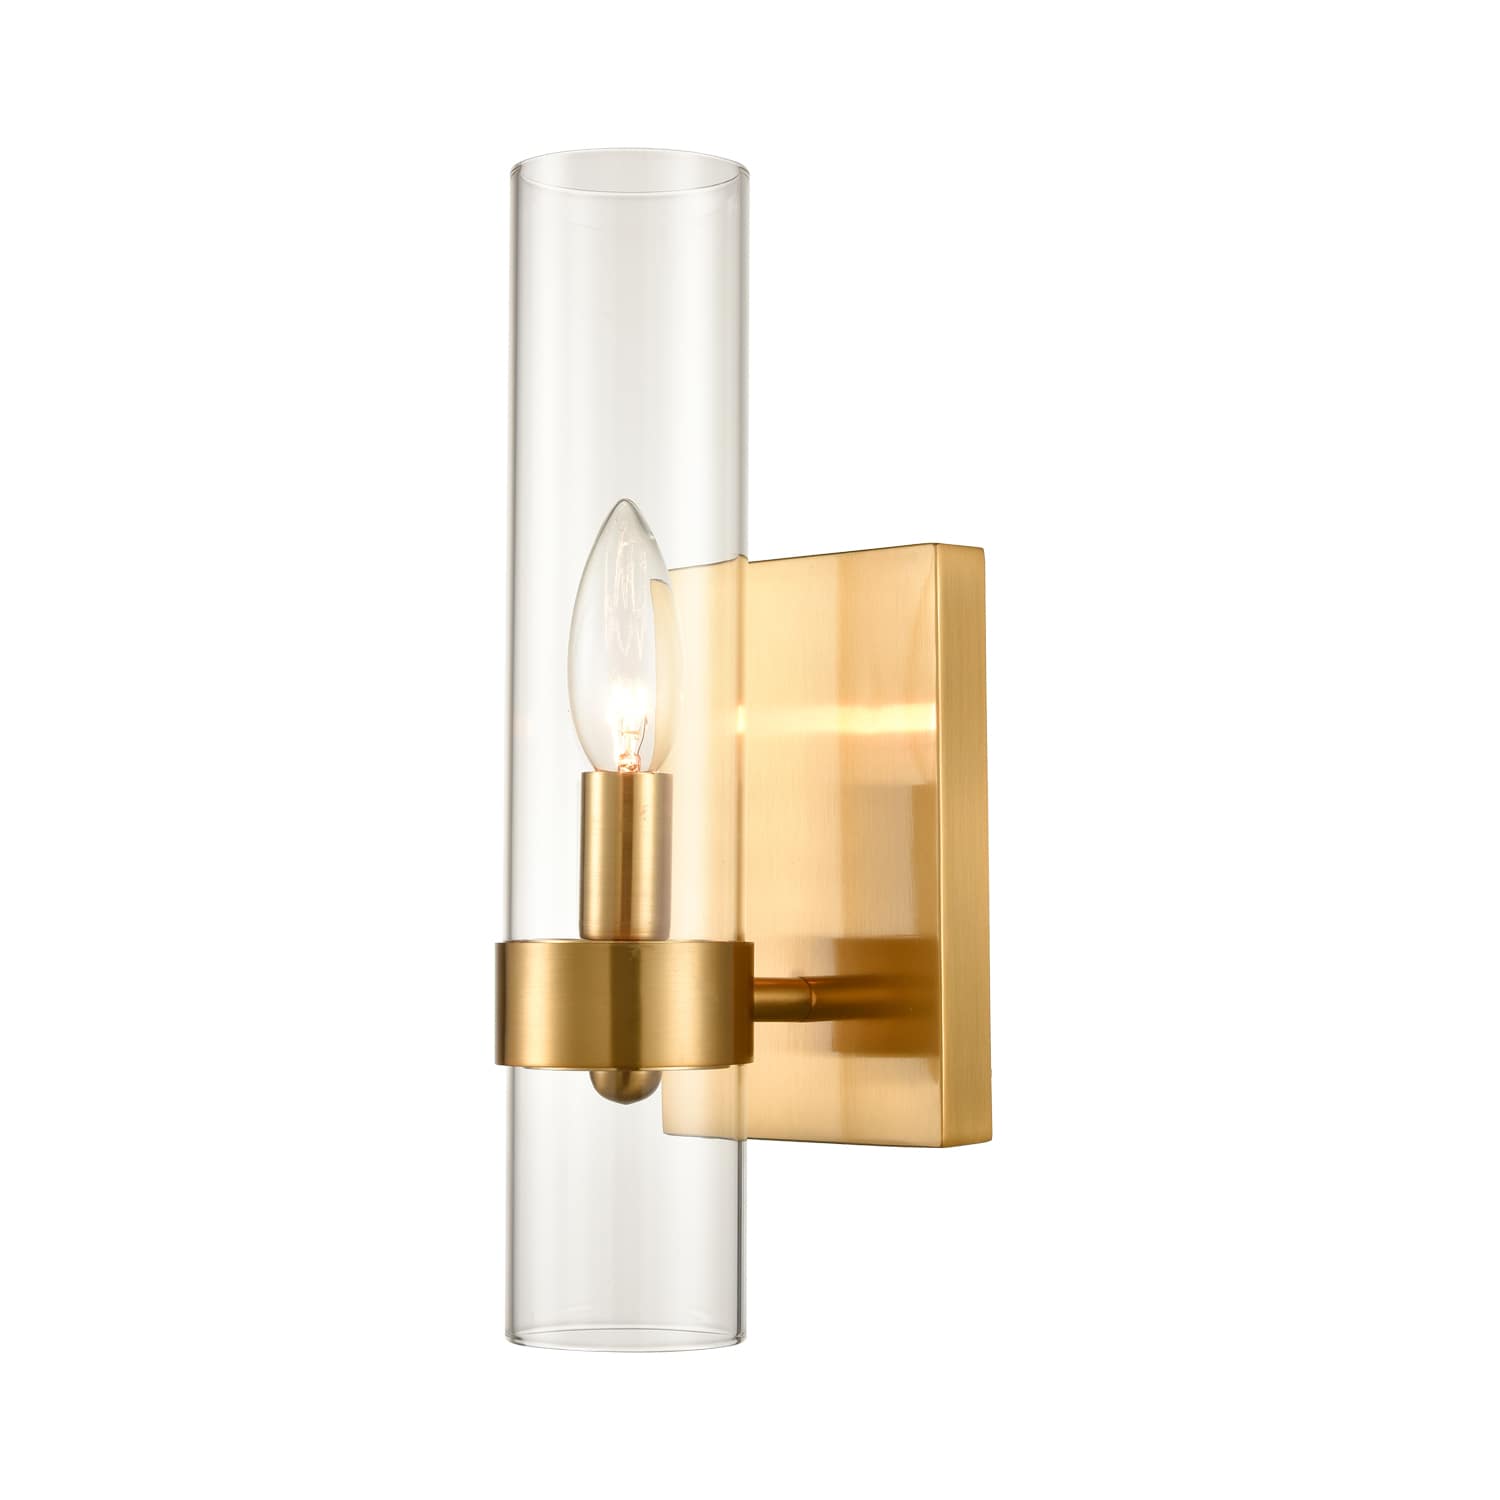 Modern Gold Wall Light Sconce with Glass Shade Hallway Bedroom Bathroom Fixtures 